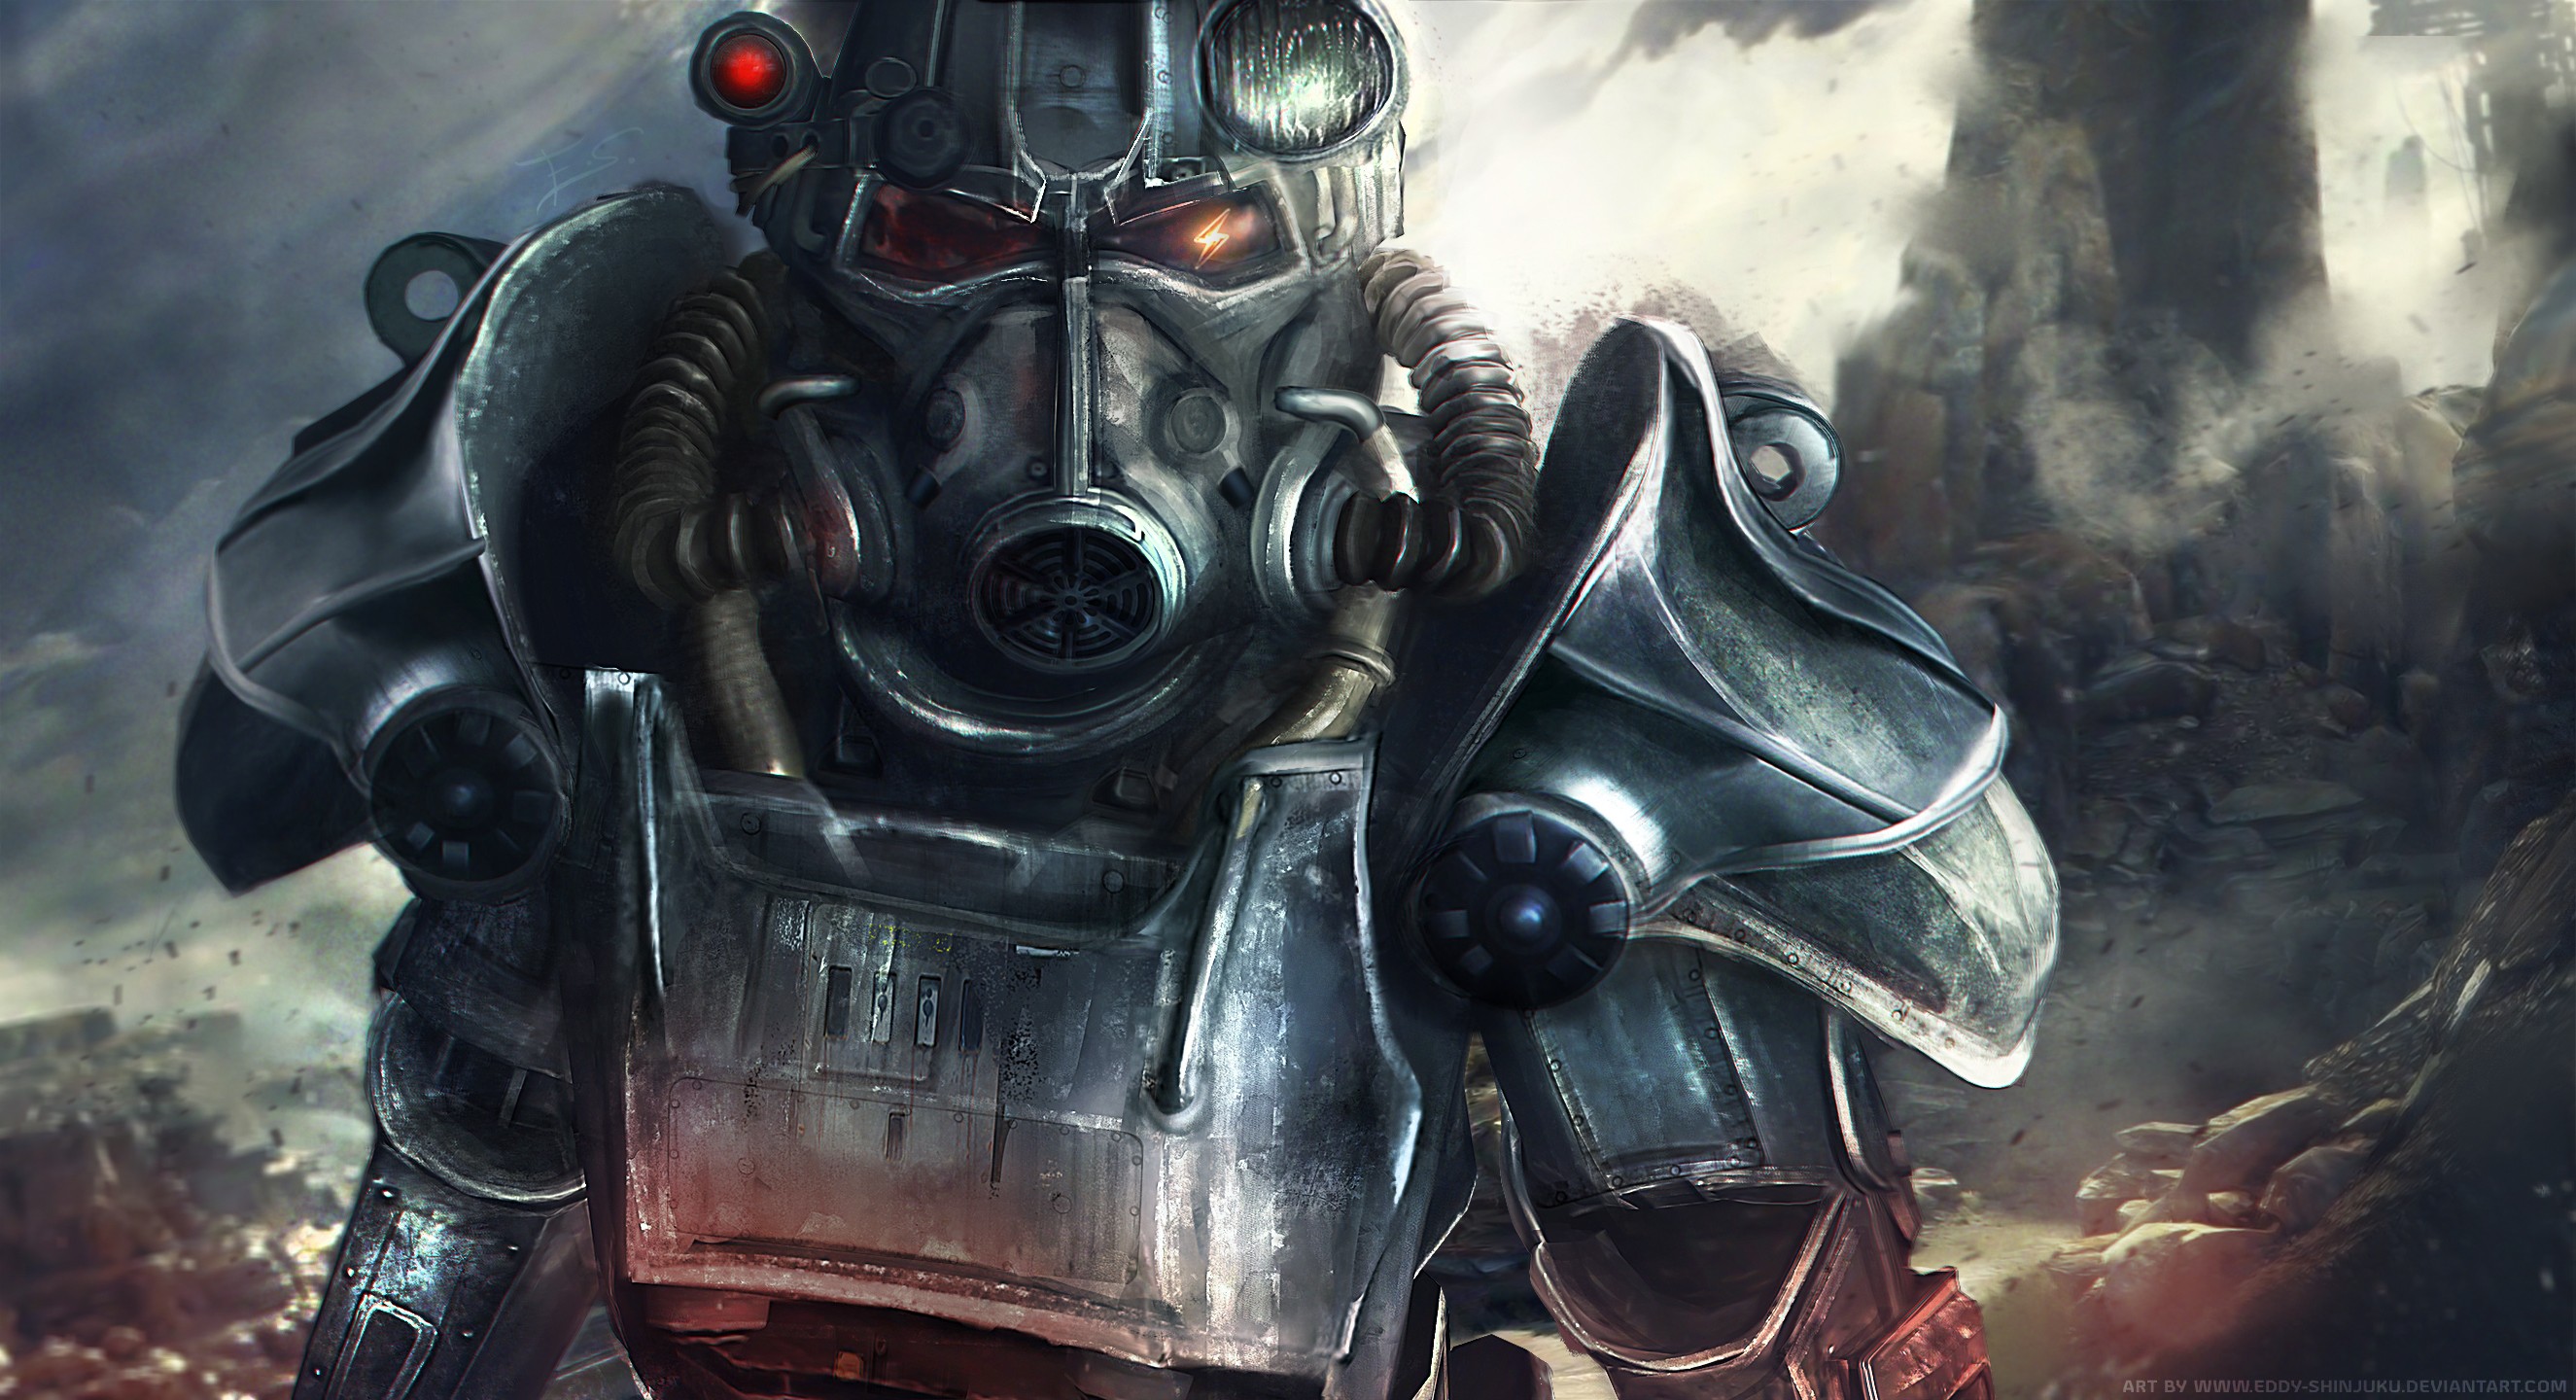 Fallout 4 Video Games Artwork Fallout Bethesda Softworks Brotherhood Of Steel Nuclear Apocalyptic Po 2650x1440